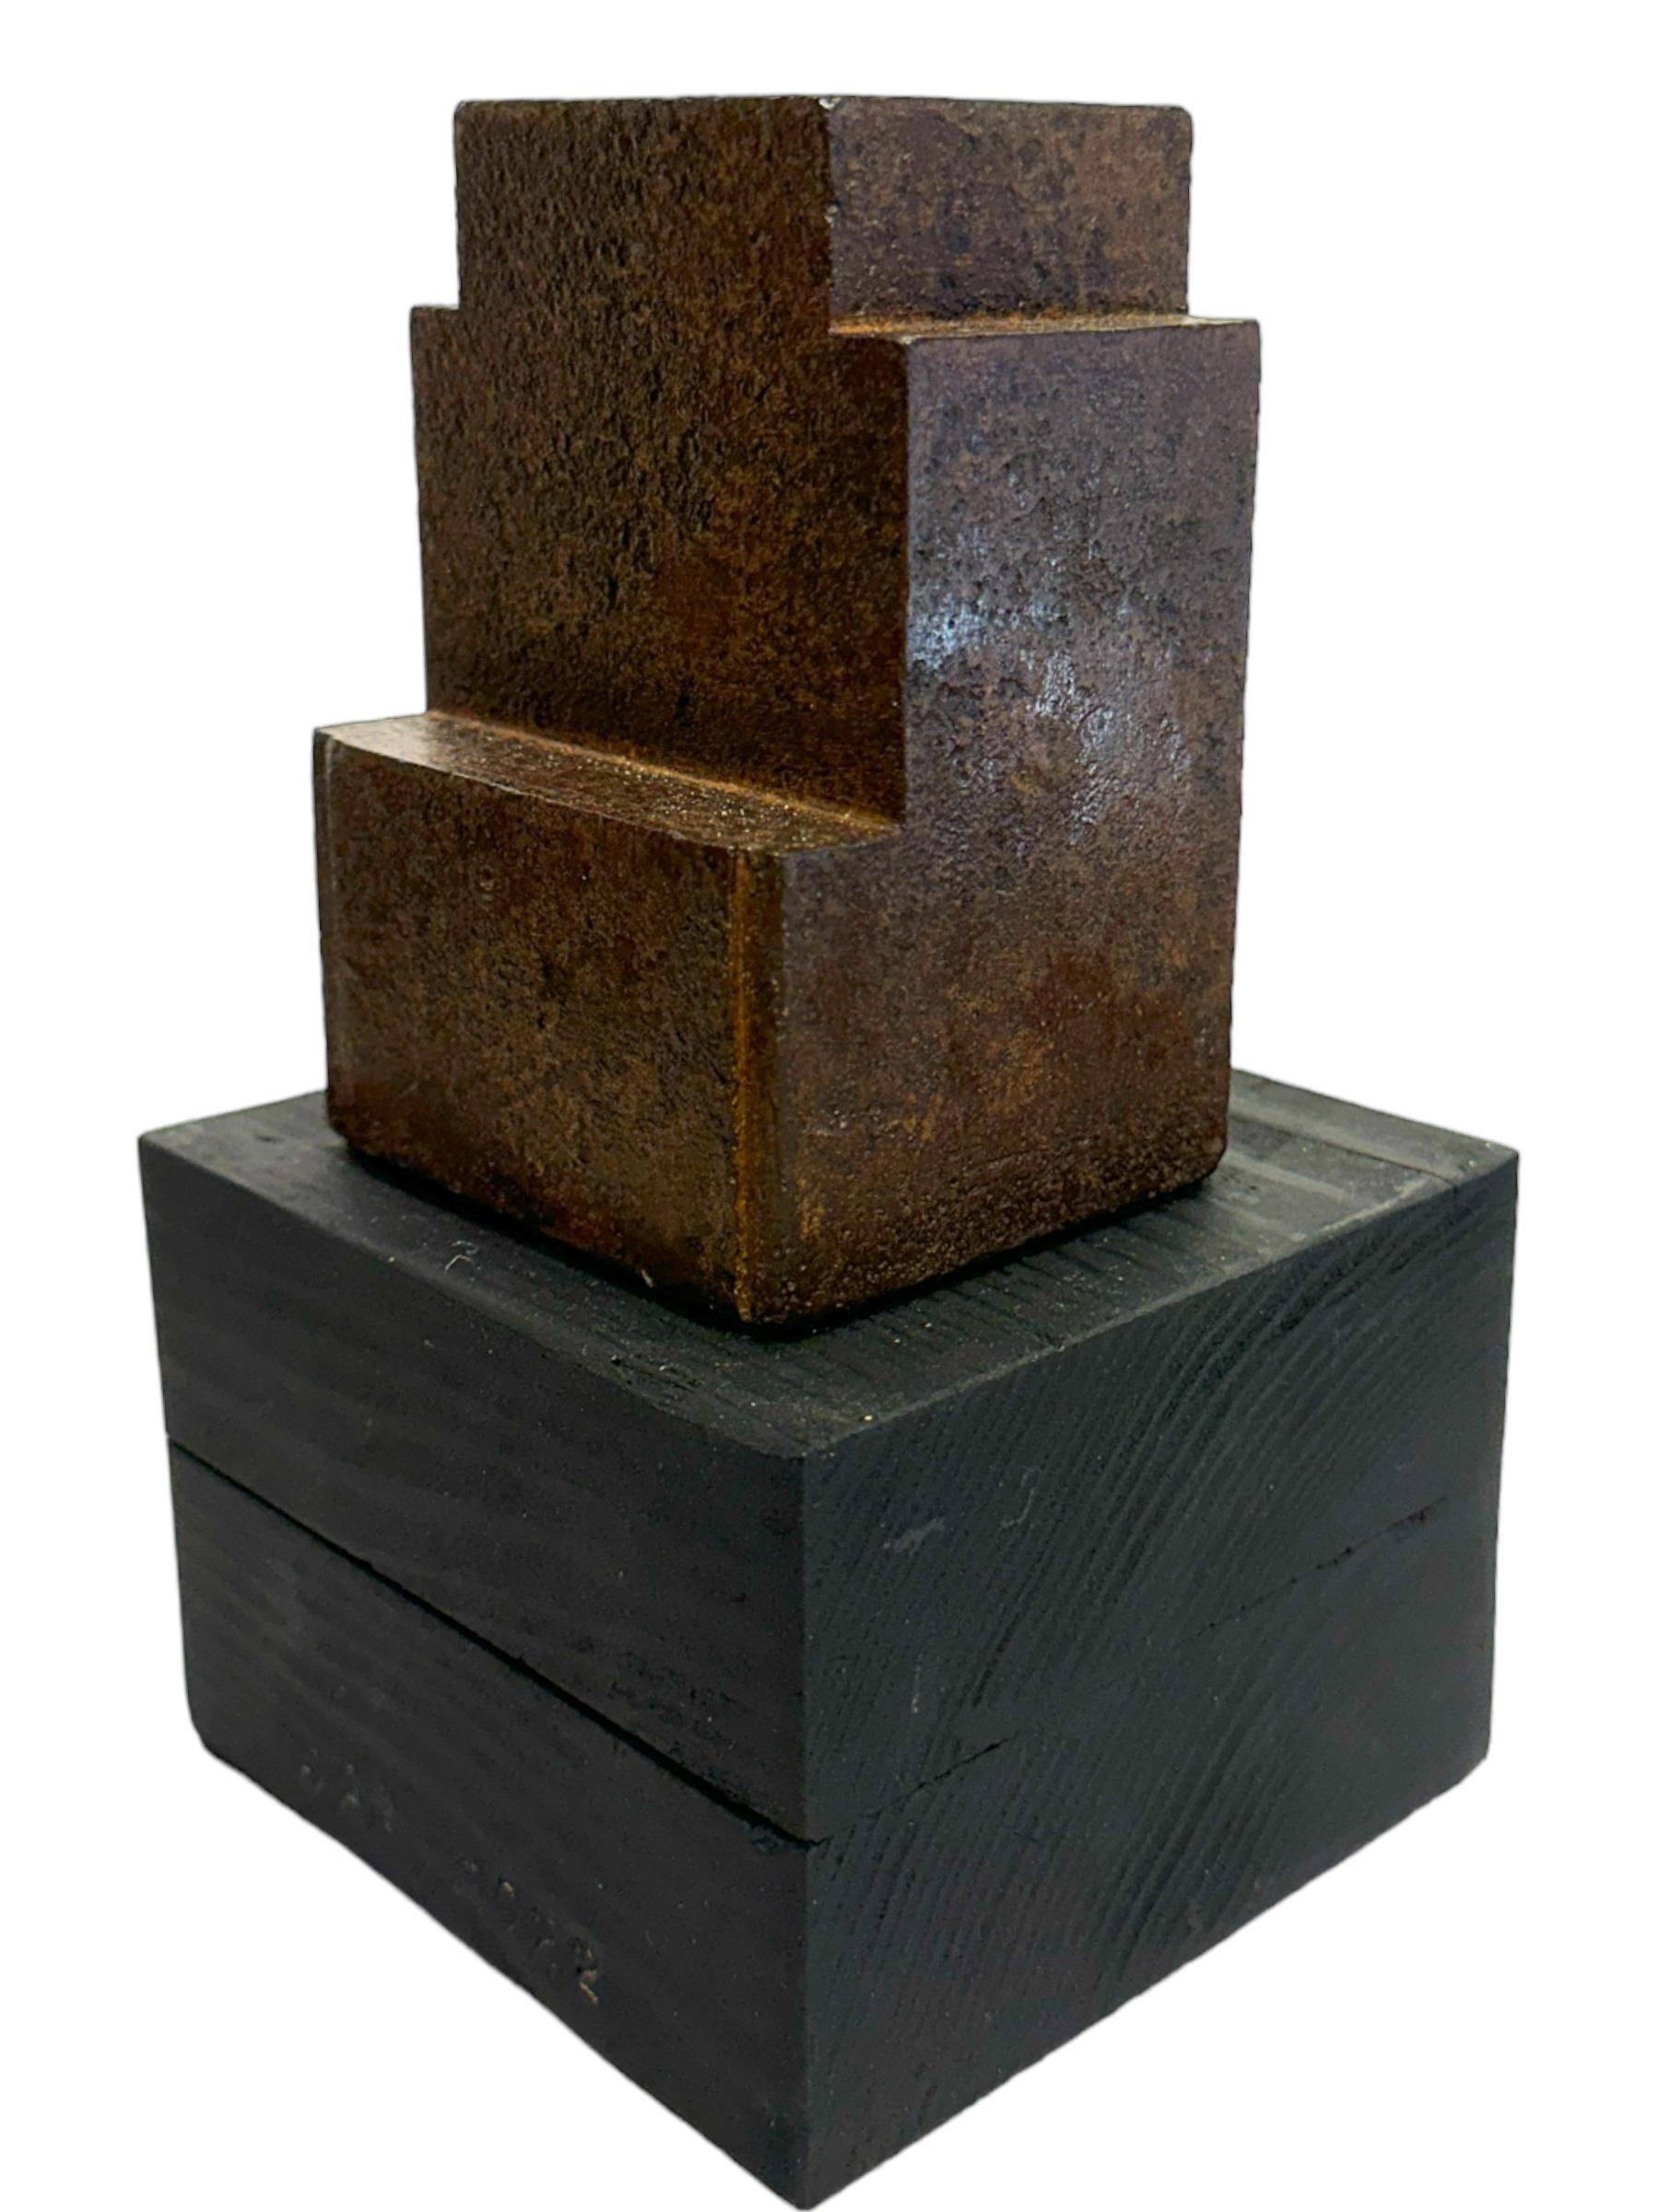 American Minimalist Modern Structure, Rusted Steel on Wood Block Base For Sale